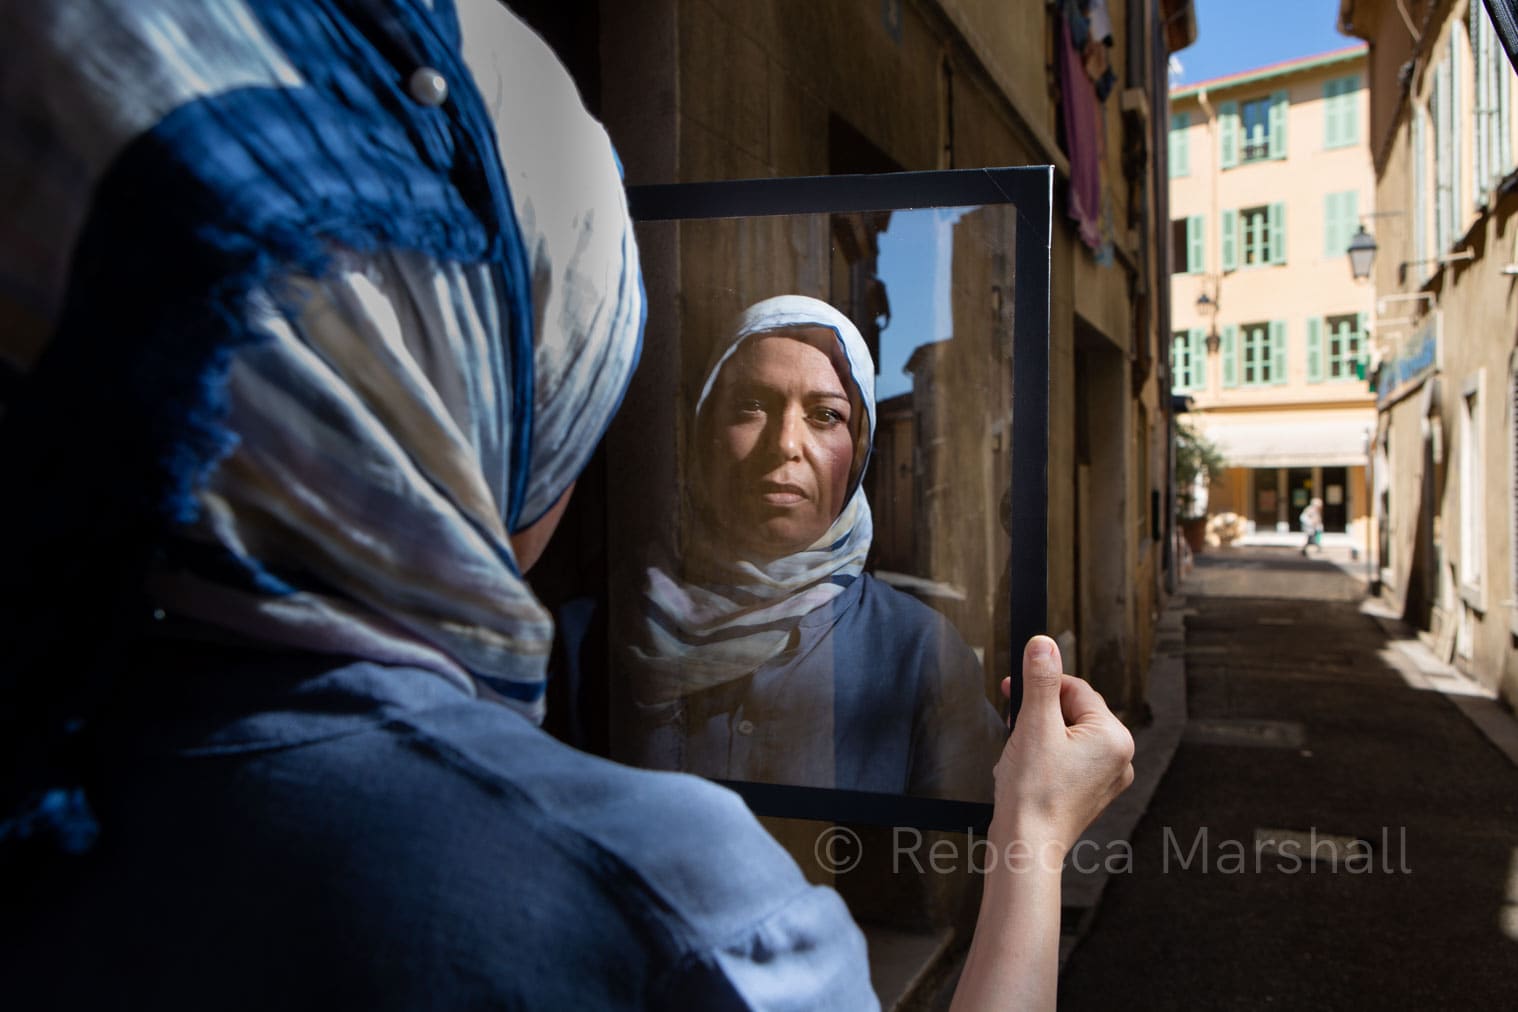 Photograph of the reflection of a headscarf-wearing woman in a sheet of glass that she holds in a quiet alley